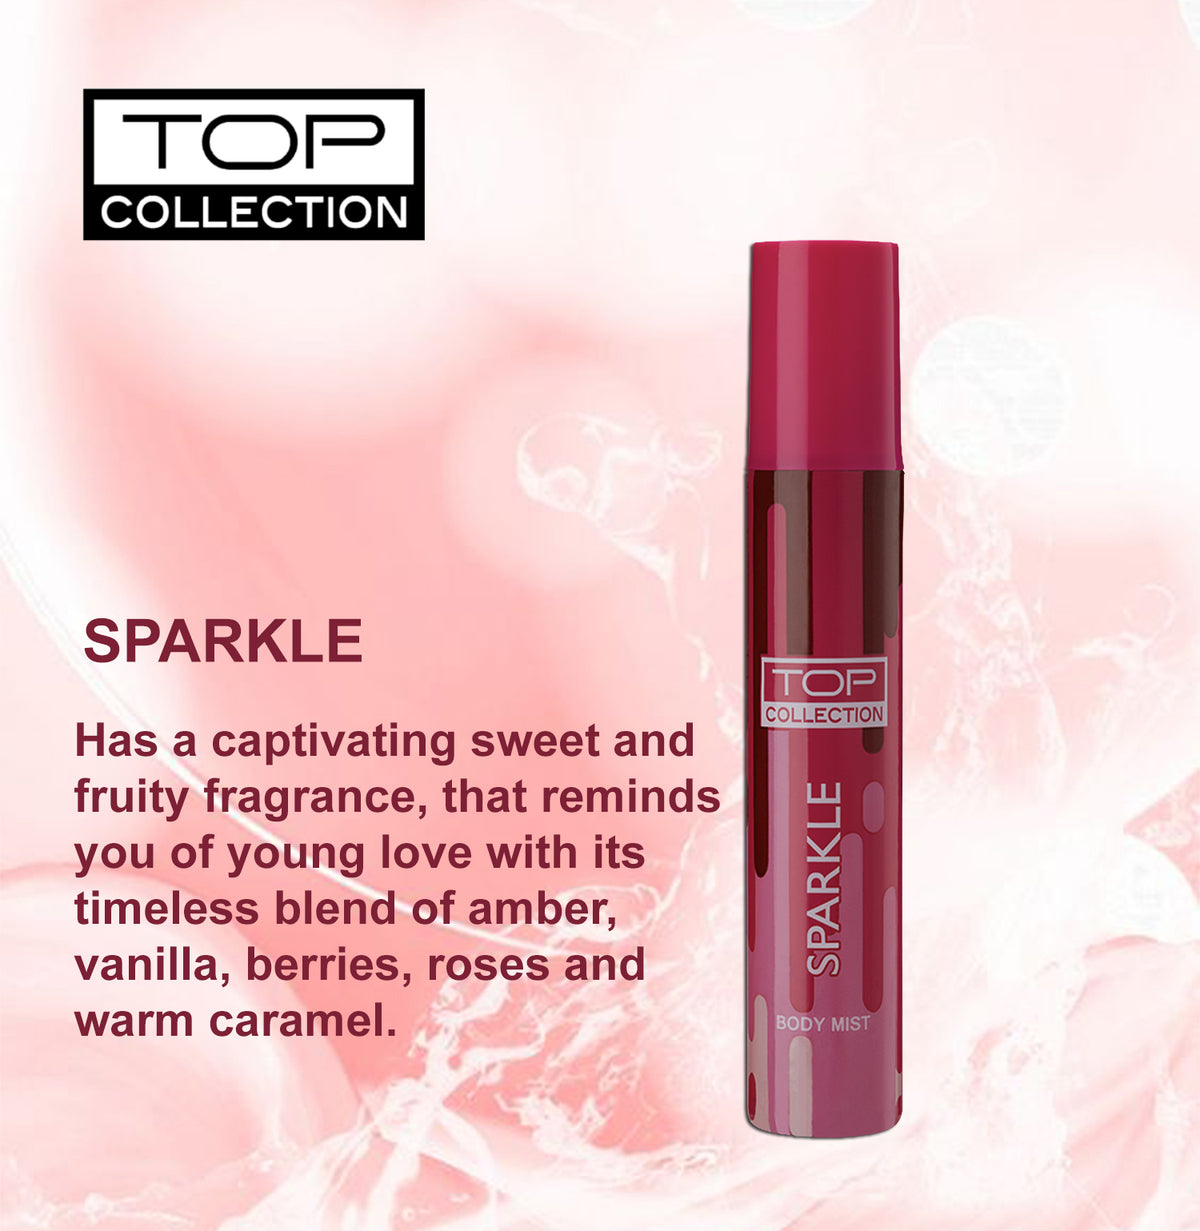 Top Collection Body Mist - Sparkle, 75ml